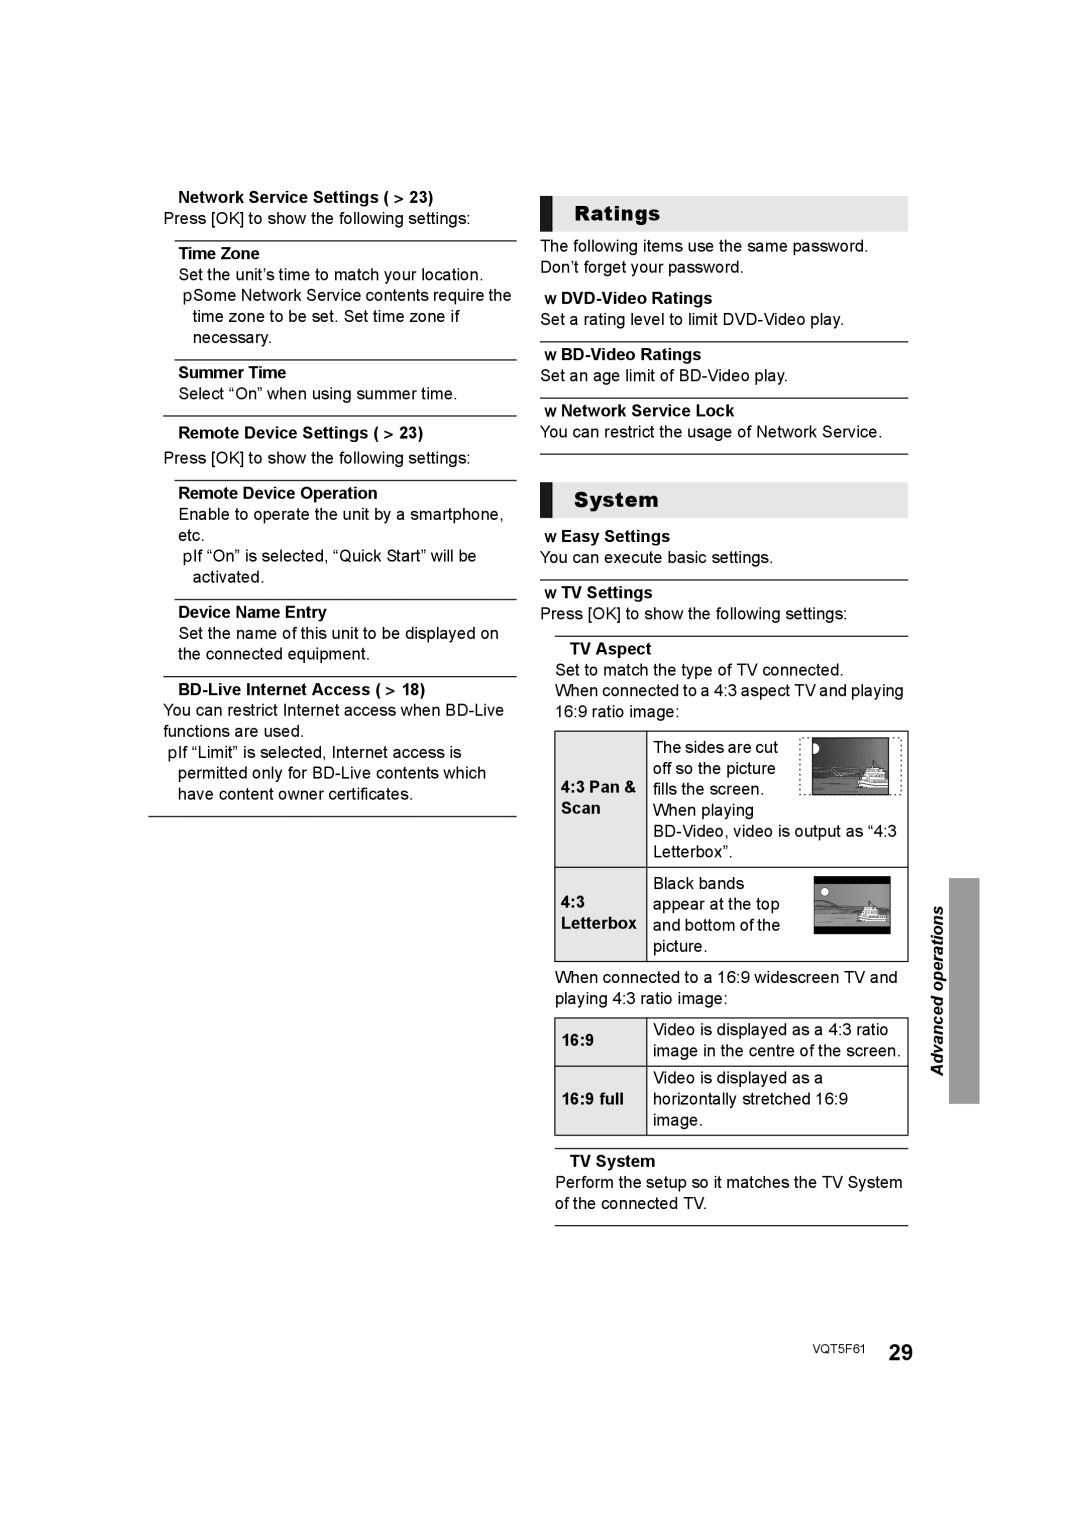 Panasonic SC-BTT465, SC-BTT405, SC-BTT785, SC-BTT433 owner manual Ratings, System 